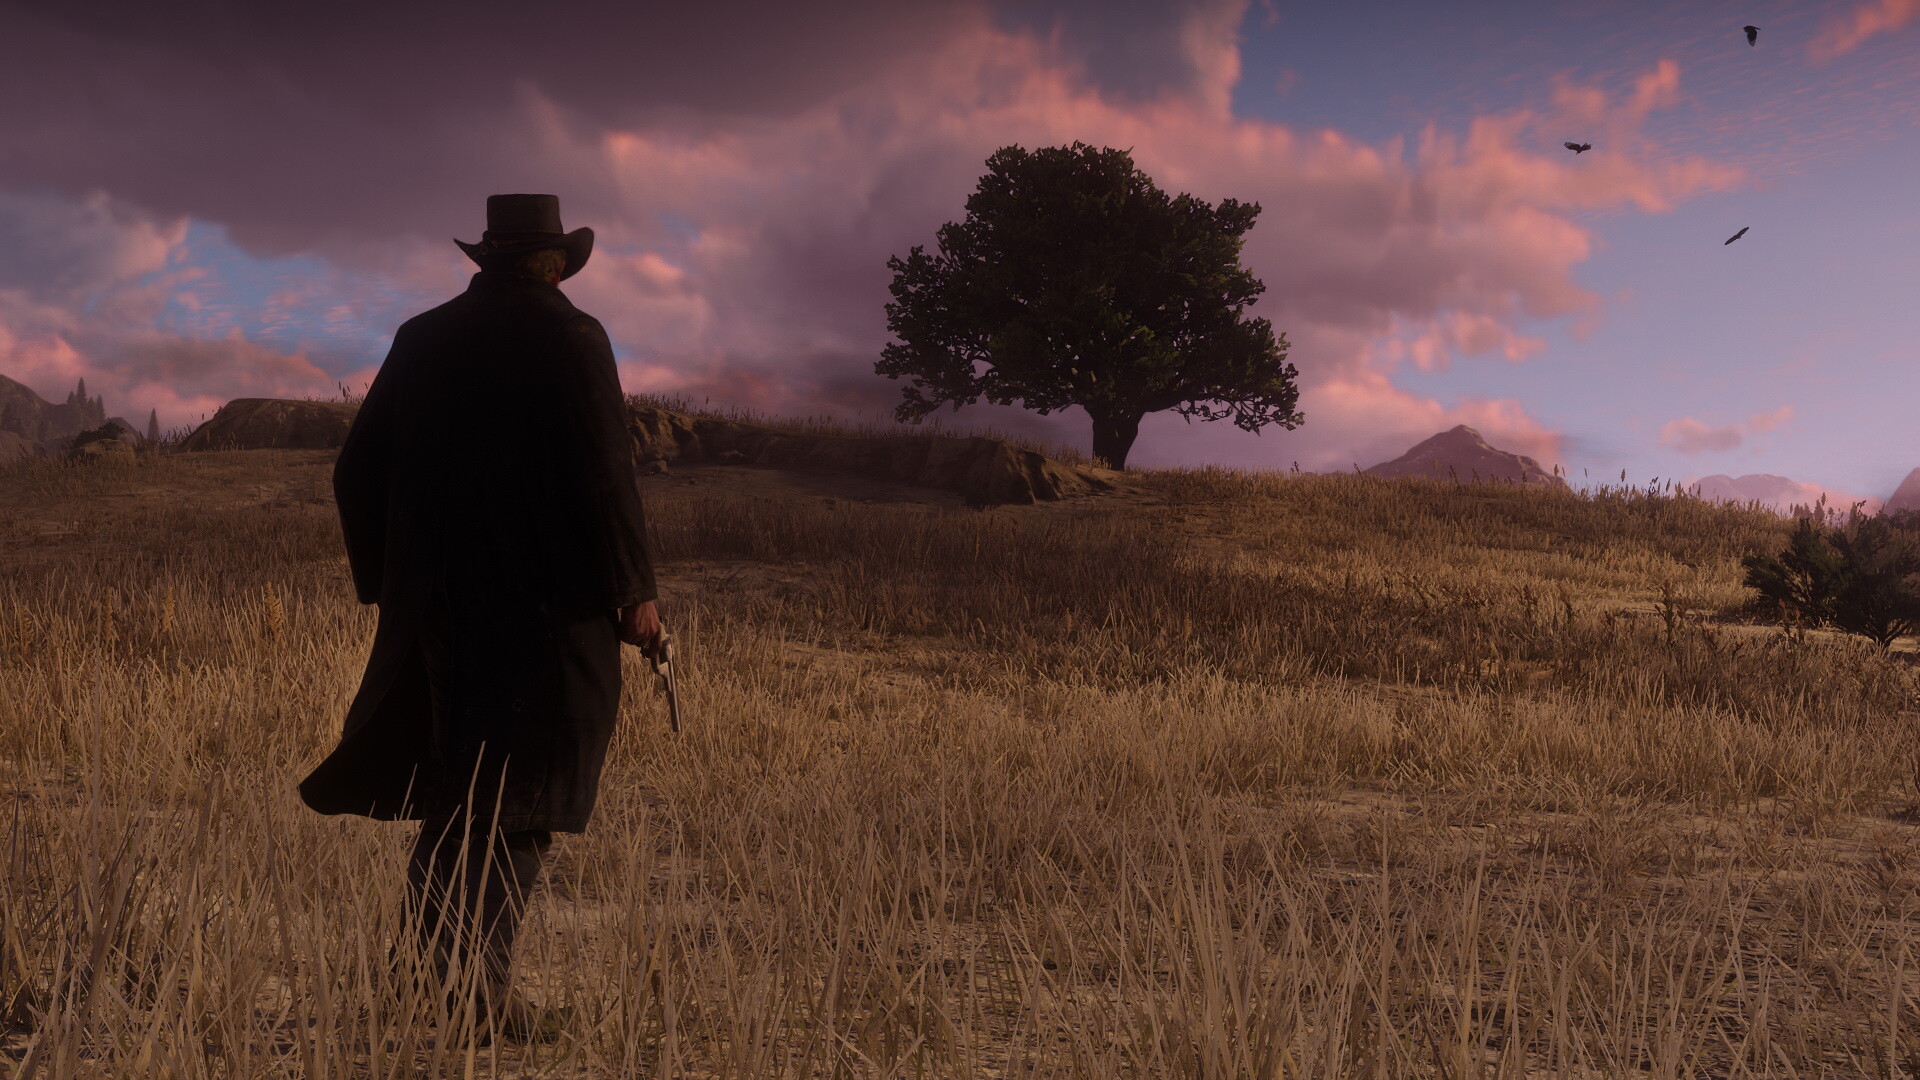 Red Dead Redemption: The third entry in the western-themed action-adventure games series. 1920x1080 Full HD Wallpaper.